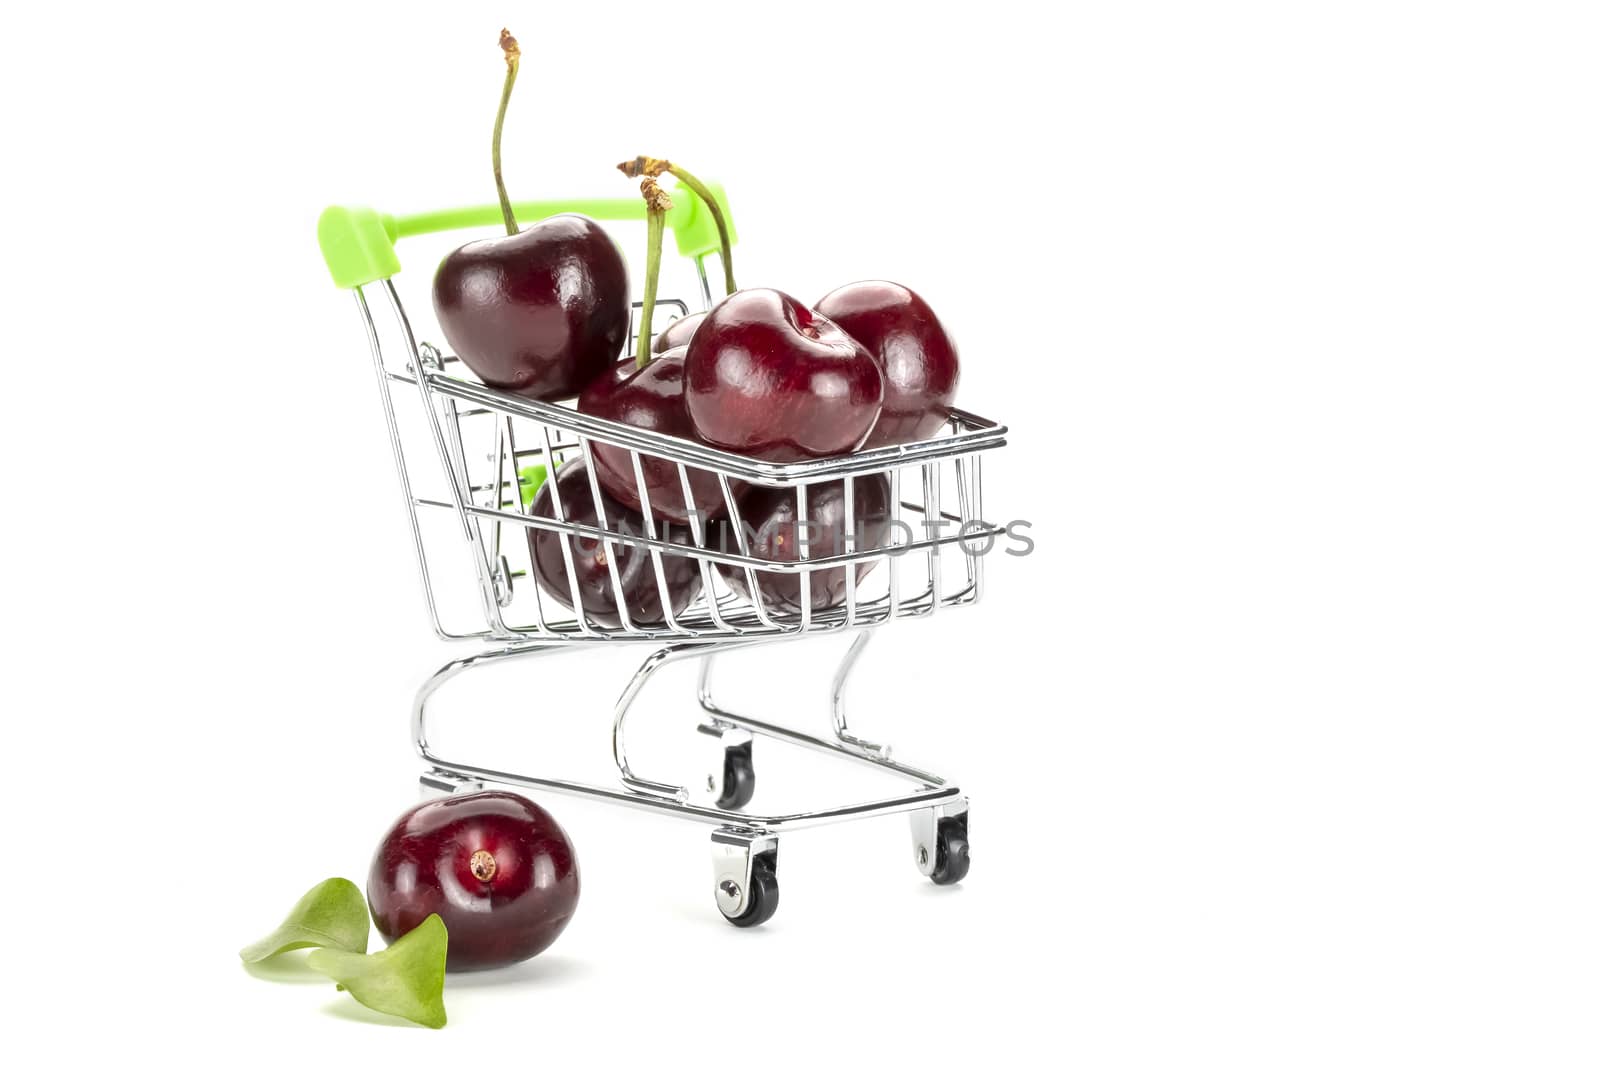 A bunch of dark red fresh cherries on a toy shopping cart. Isolated on white background.